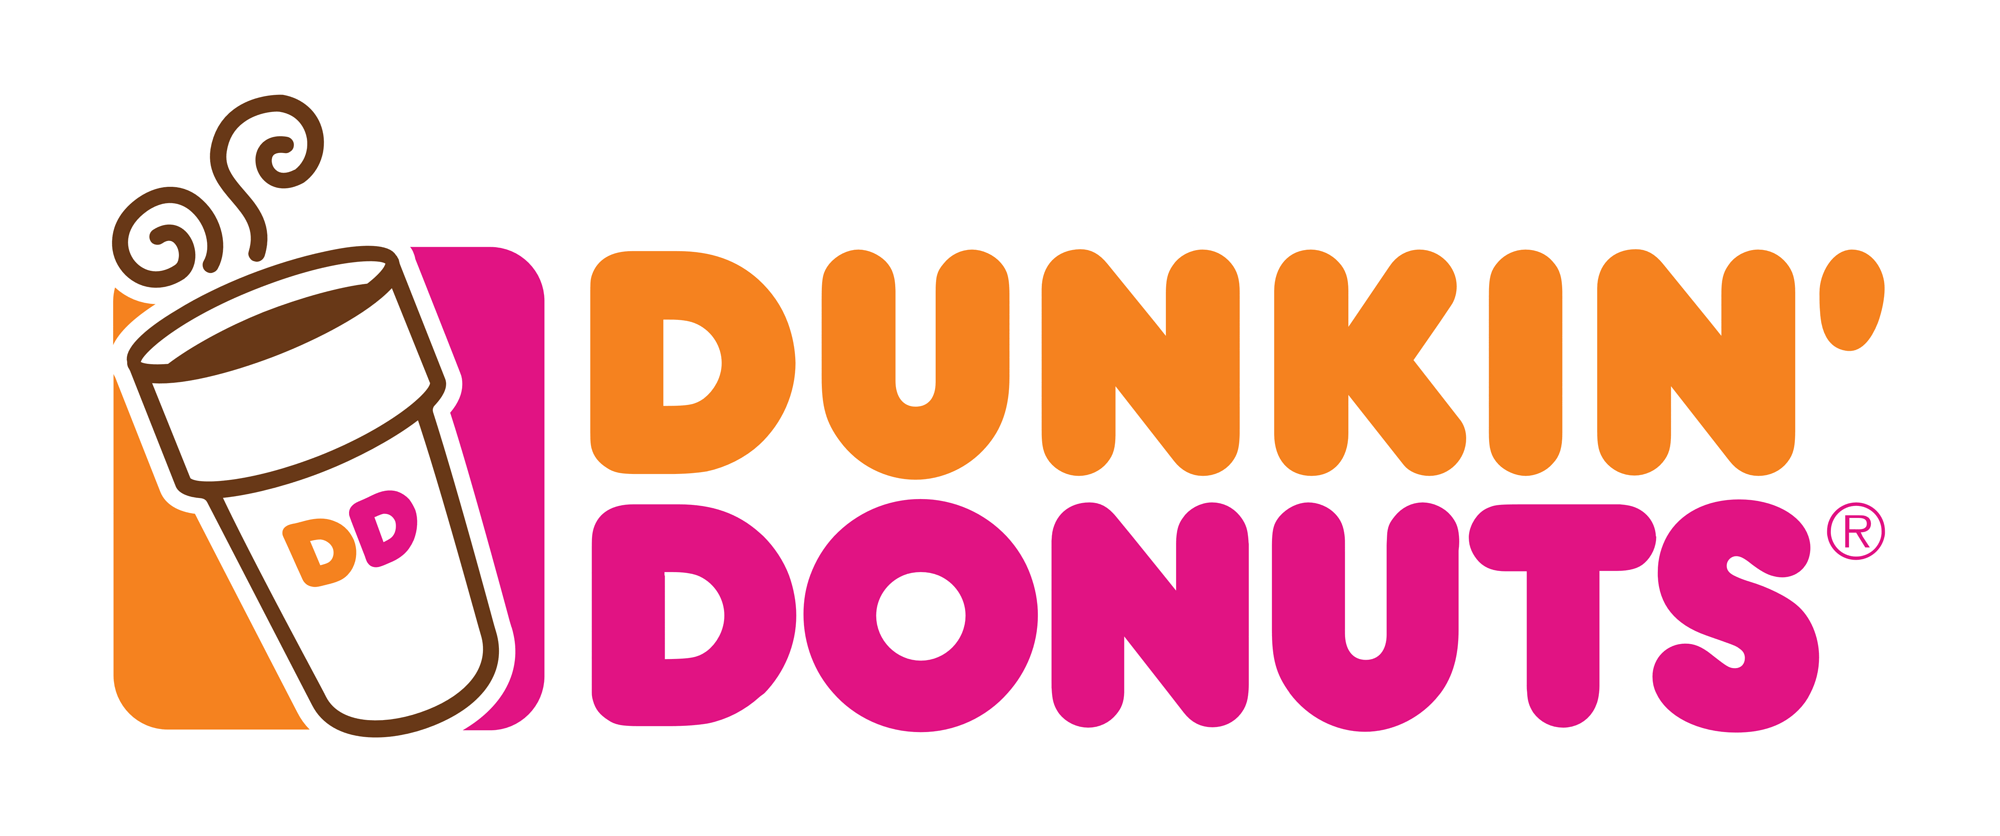 Pink Company Logo - Dunkin Donuts Logo, Dunkin Donuts Symbol, Meaning, History and Evolution